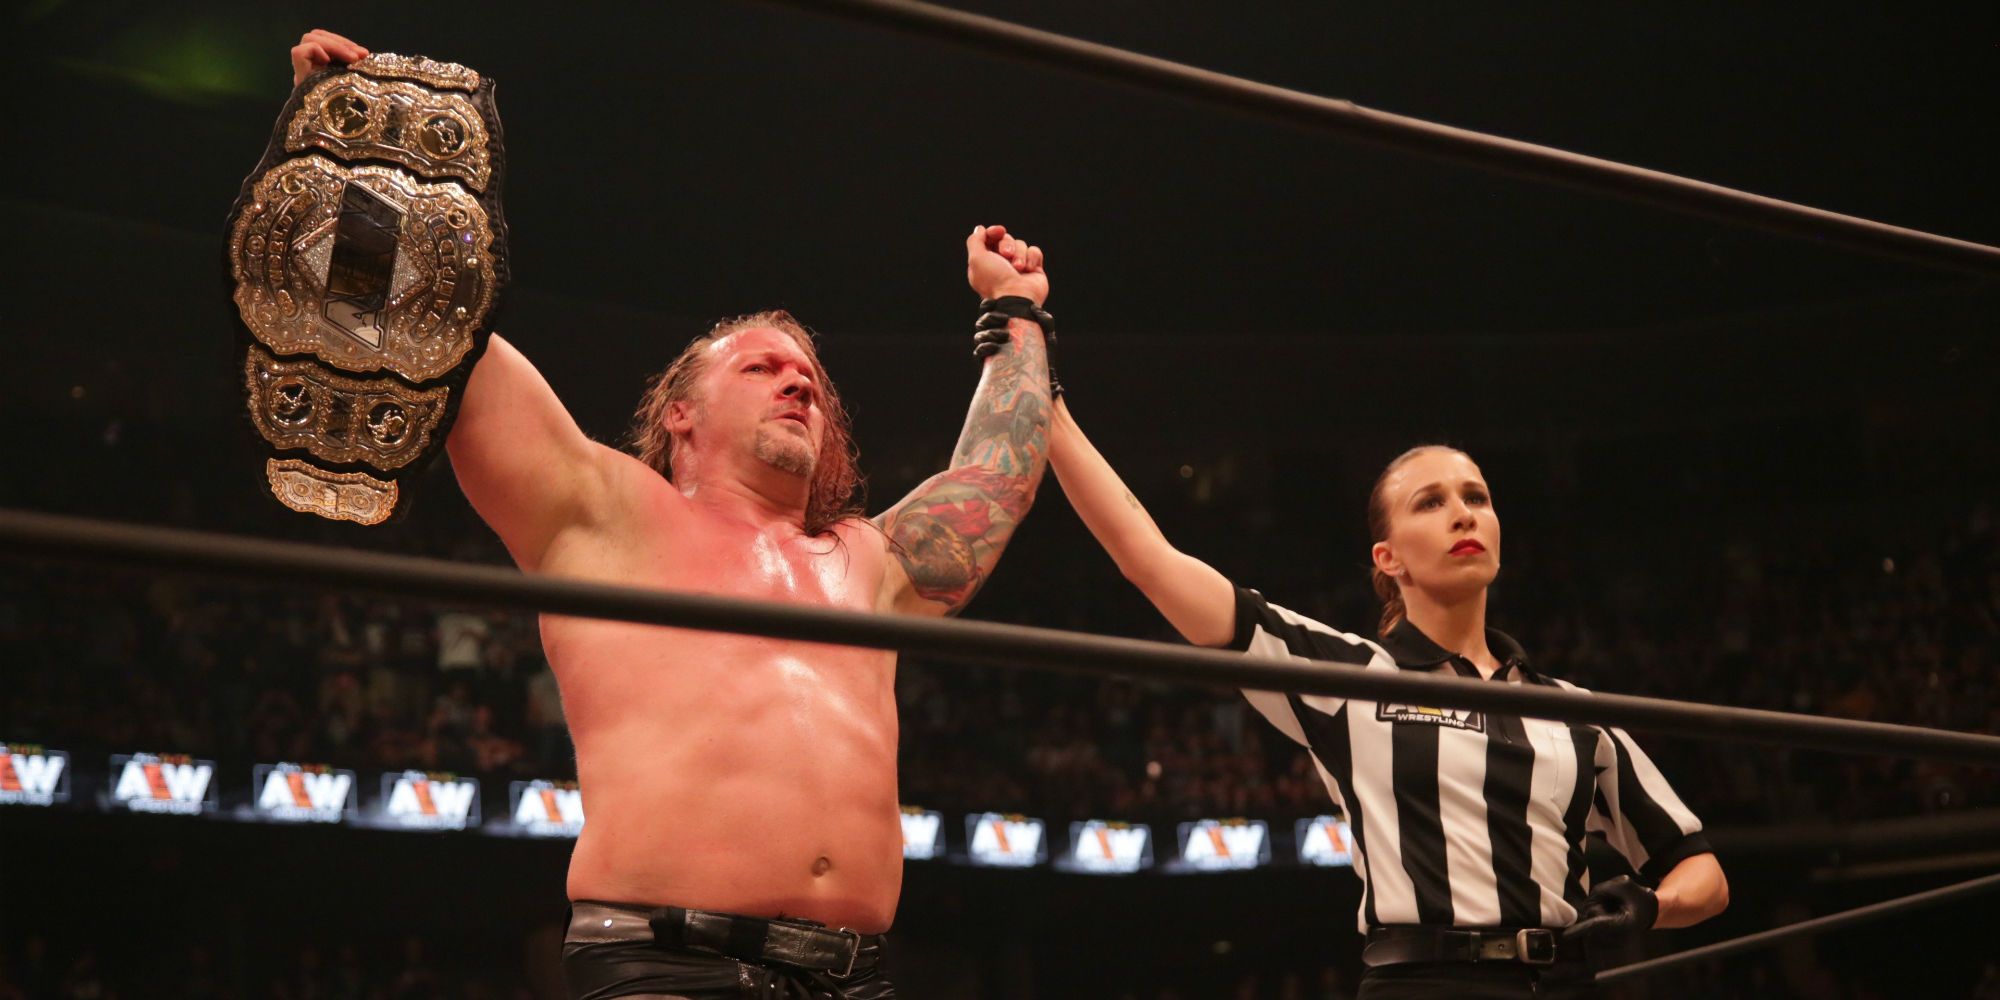 Chris Jericho Becomes First AEW World Champion at All Out Pay-Per-View